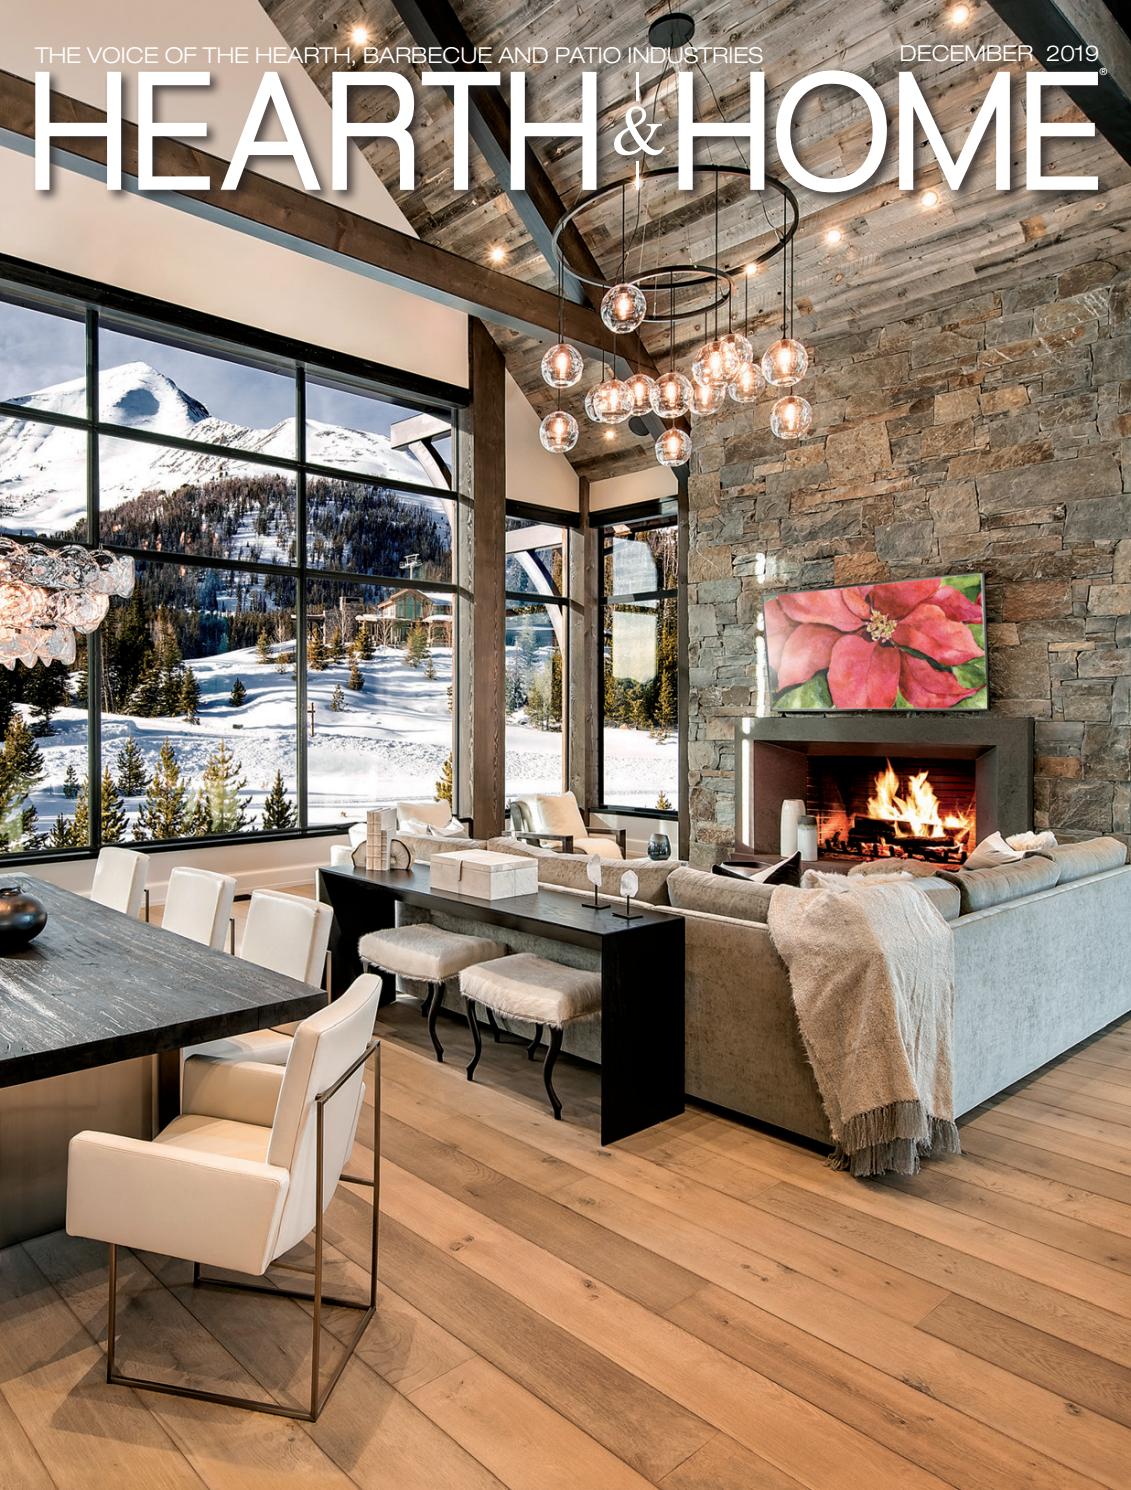 Georgetown Fireplace and Patios Awesome Hearth & Home Magazine 2019 December issue by Hearth